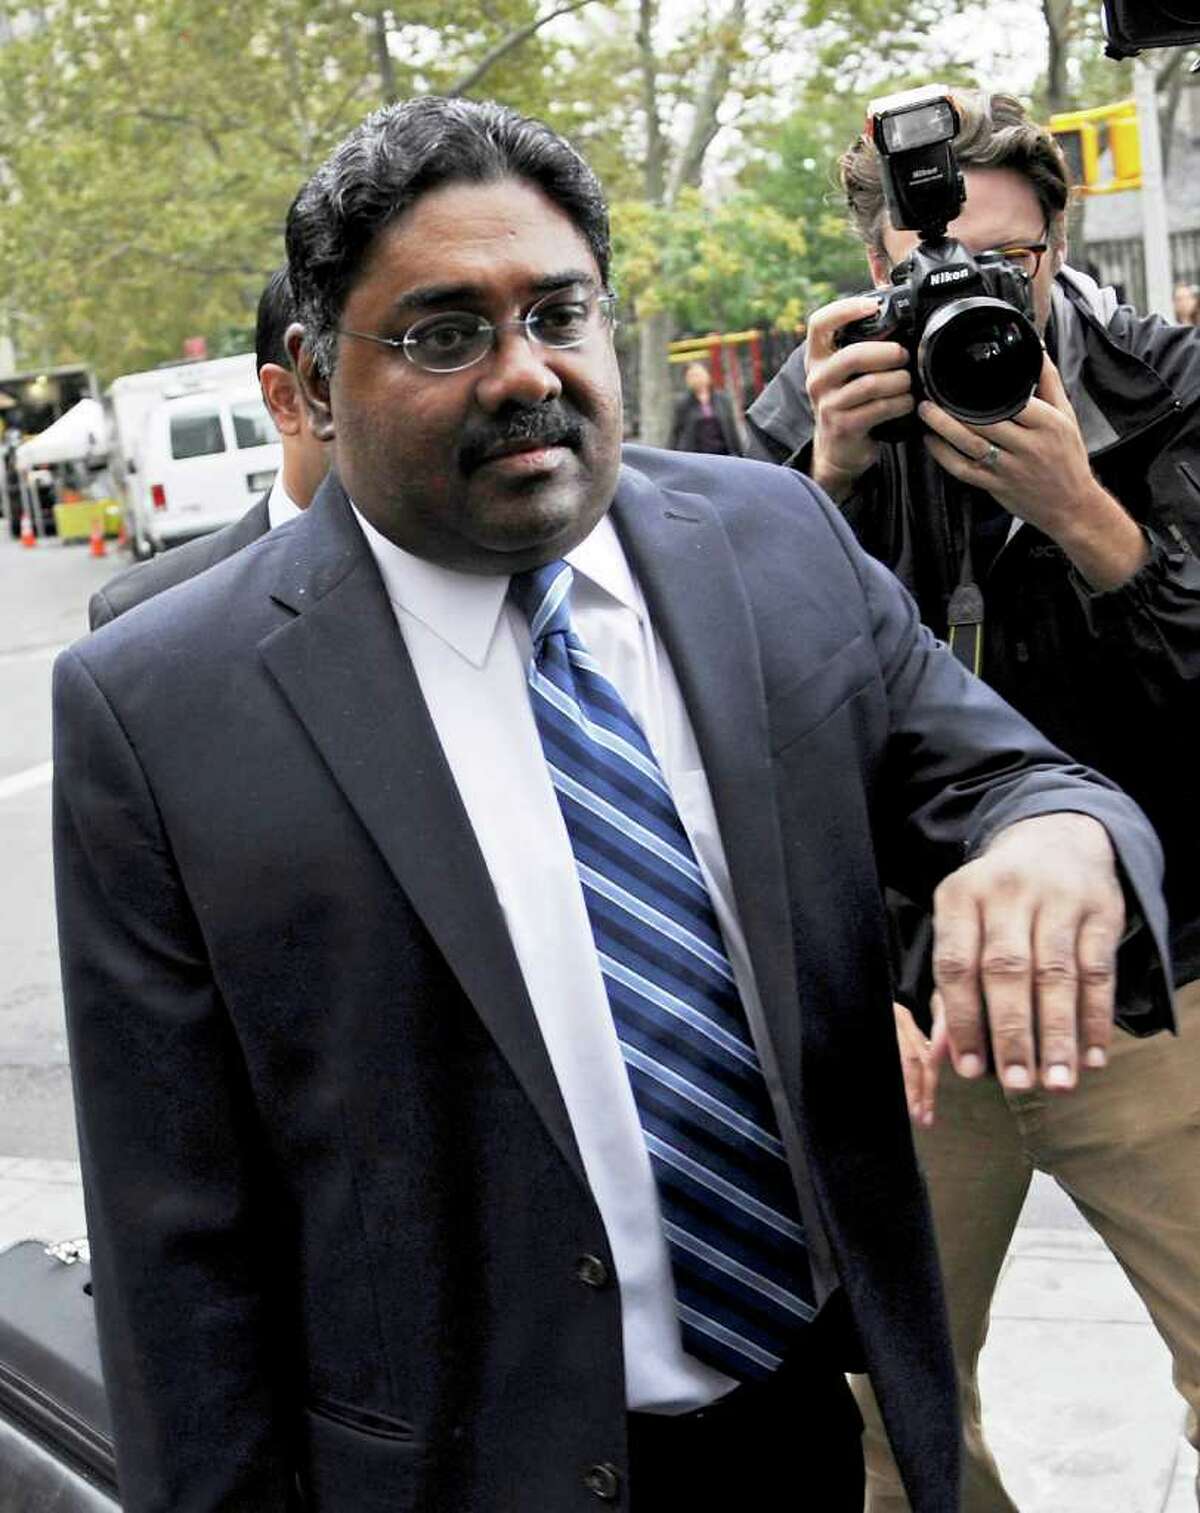 Raj Rajaratnam, co-founder of Galleon Group LLC, enters federal court in New York, U.S., on Thursday, Oct. 13, 2011. Rajaratnam was sentenced to 11 years in prison and a $10 million fine for conspiracy and securities fraud. Photographer: Peter Foley/Bloomberg *** Local Caption *** Raj Rajaratnam